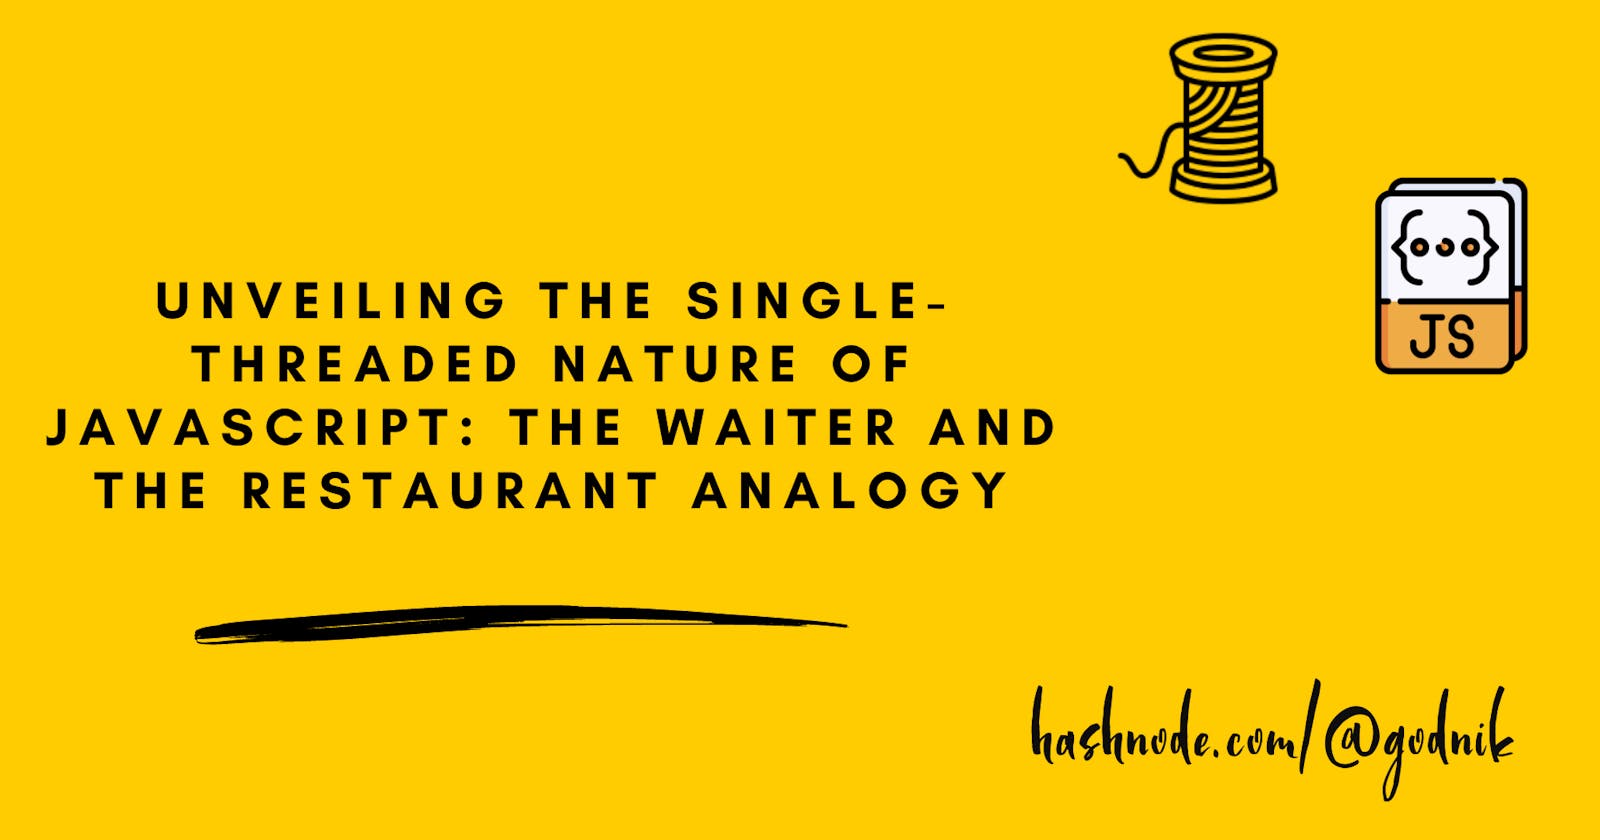 Unveiling the Single-Threaded Nature of JavaScript and Node.js: The Waiter and the Restaurant Analogy